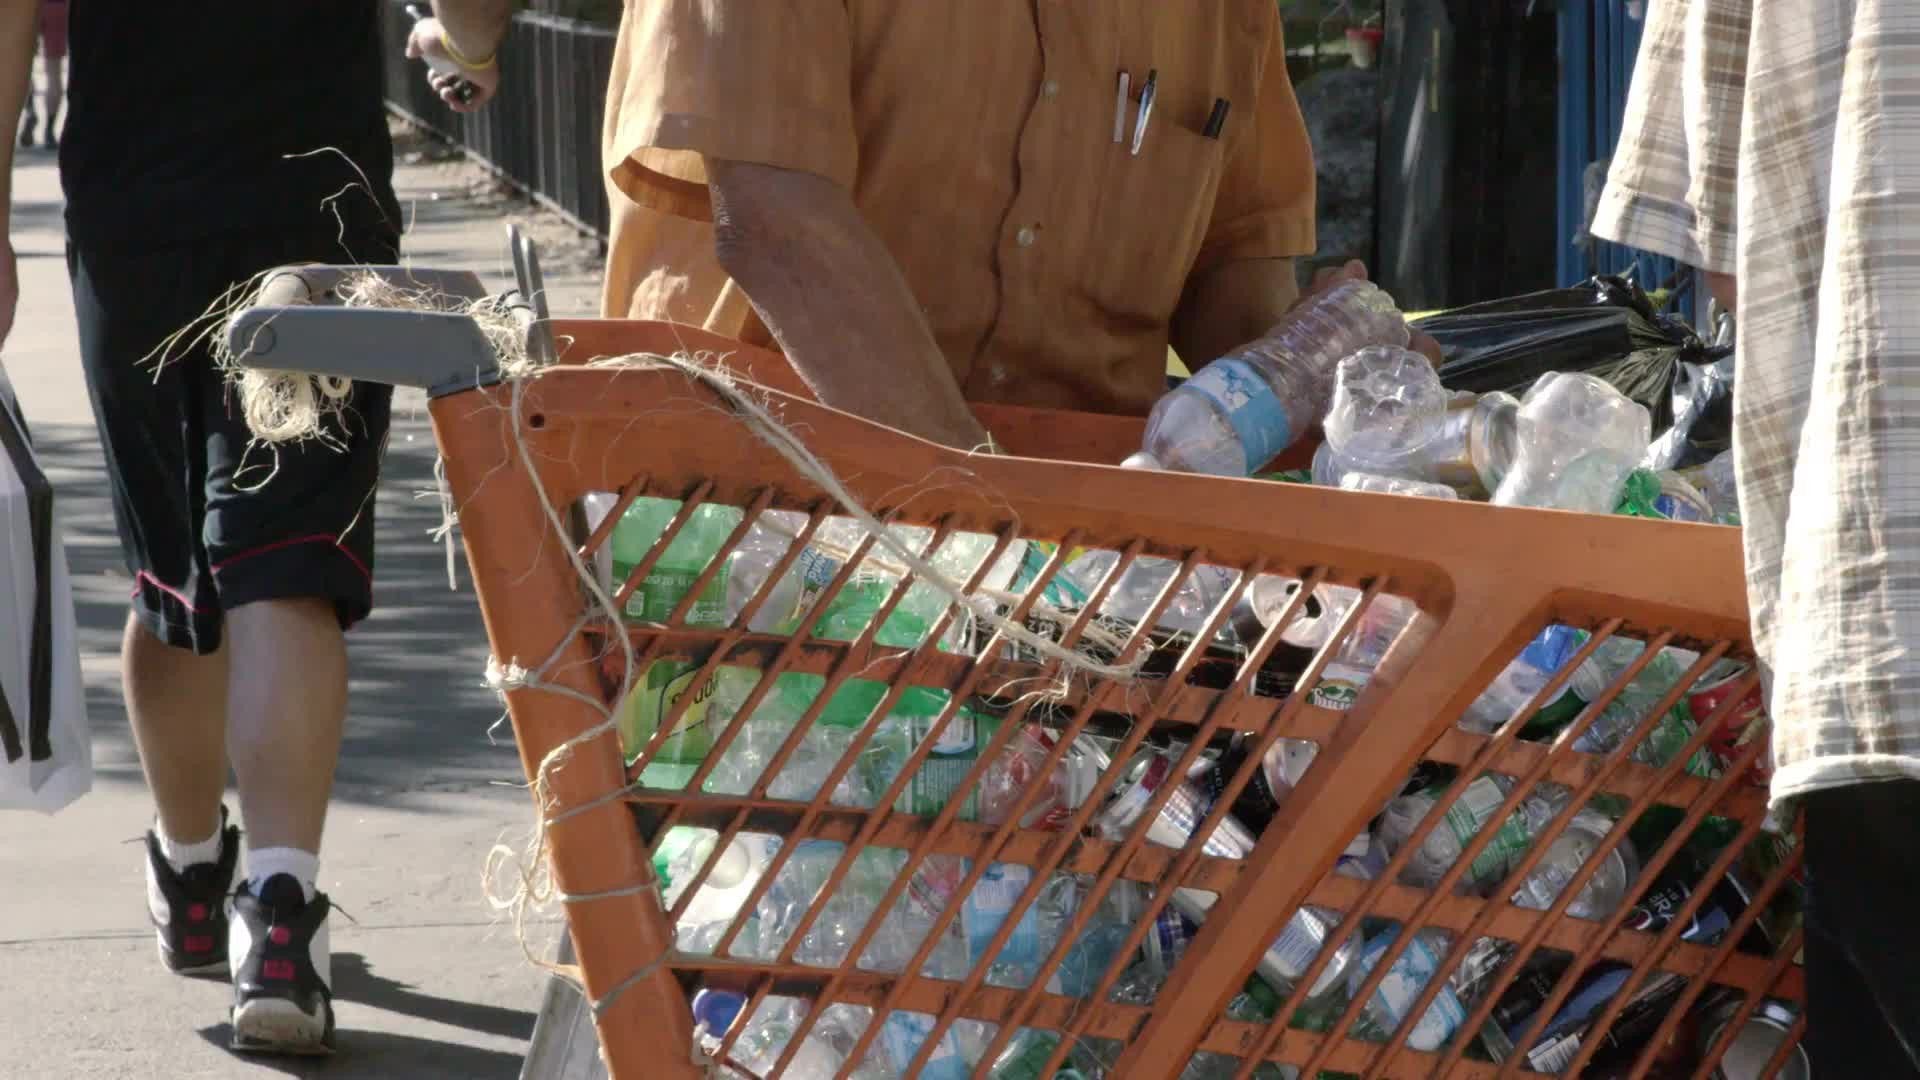 man collecting bottles in shopping cart uptown in gritty Harlem recycling station in 4K